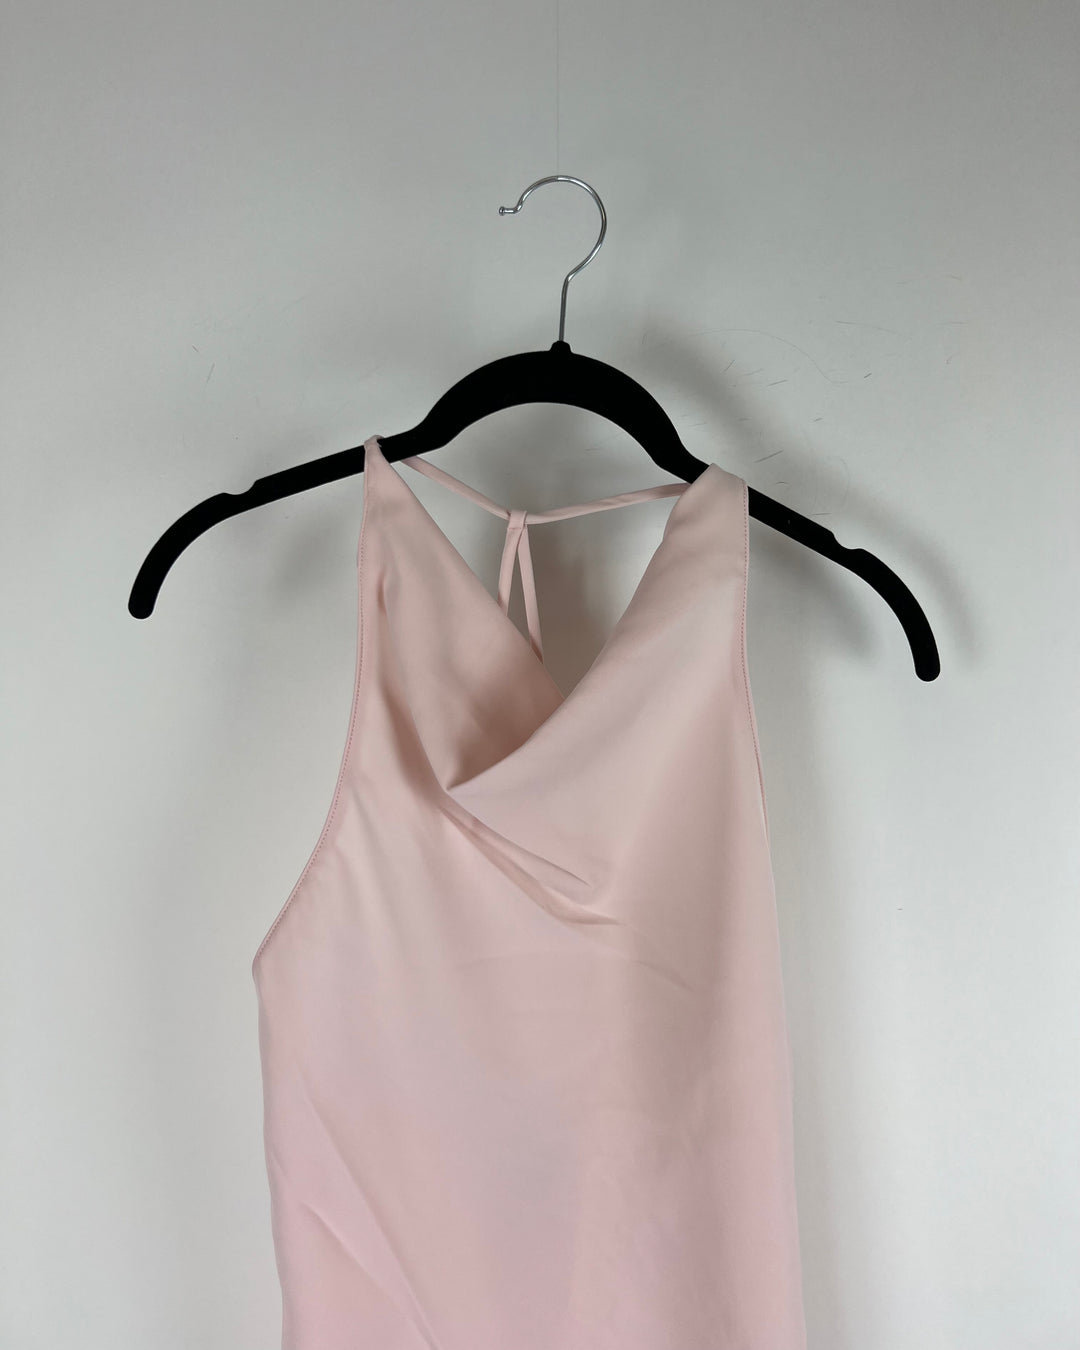 Light Pink Strappy Top - Extra Small, Small, Medium, And Large